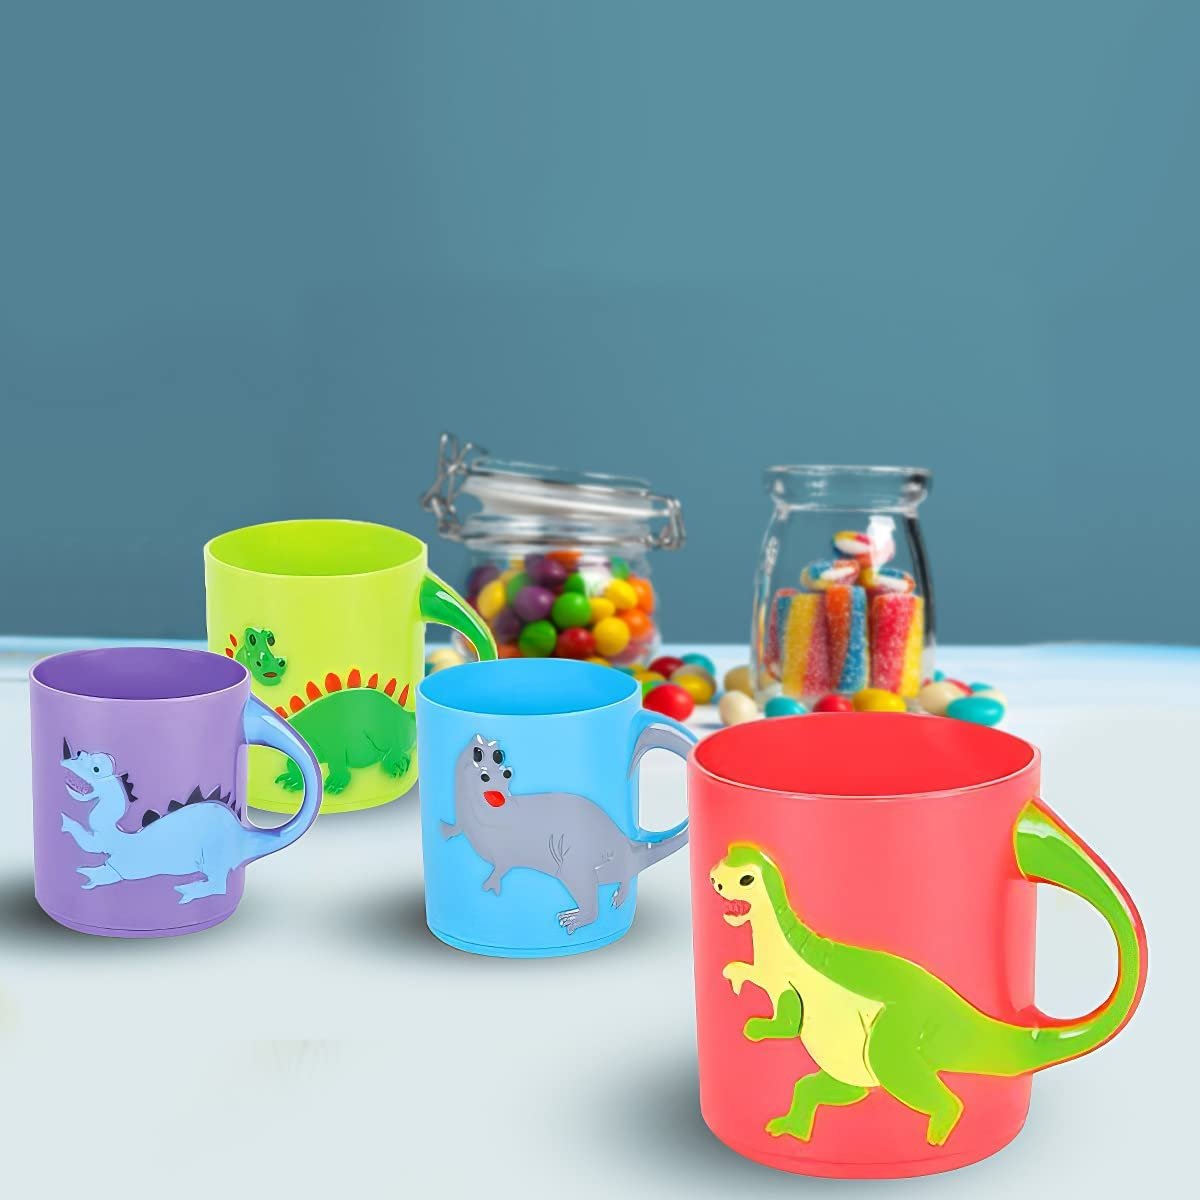 Dinosaur Mugs for Kids, Plastic Dino Cups, Set of 4 - Assorted Colors & Designs